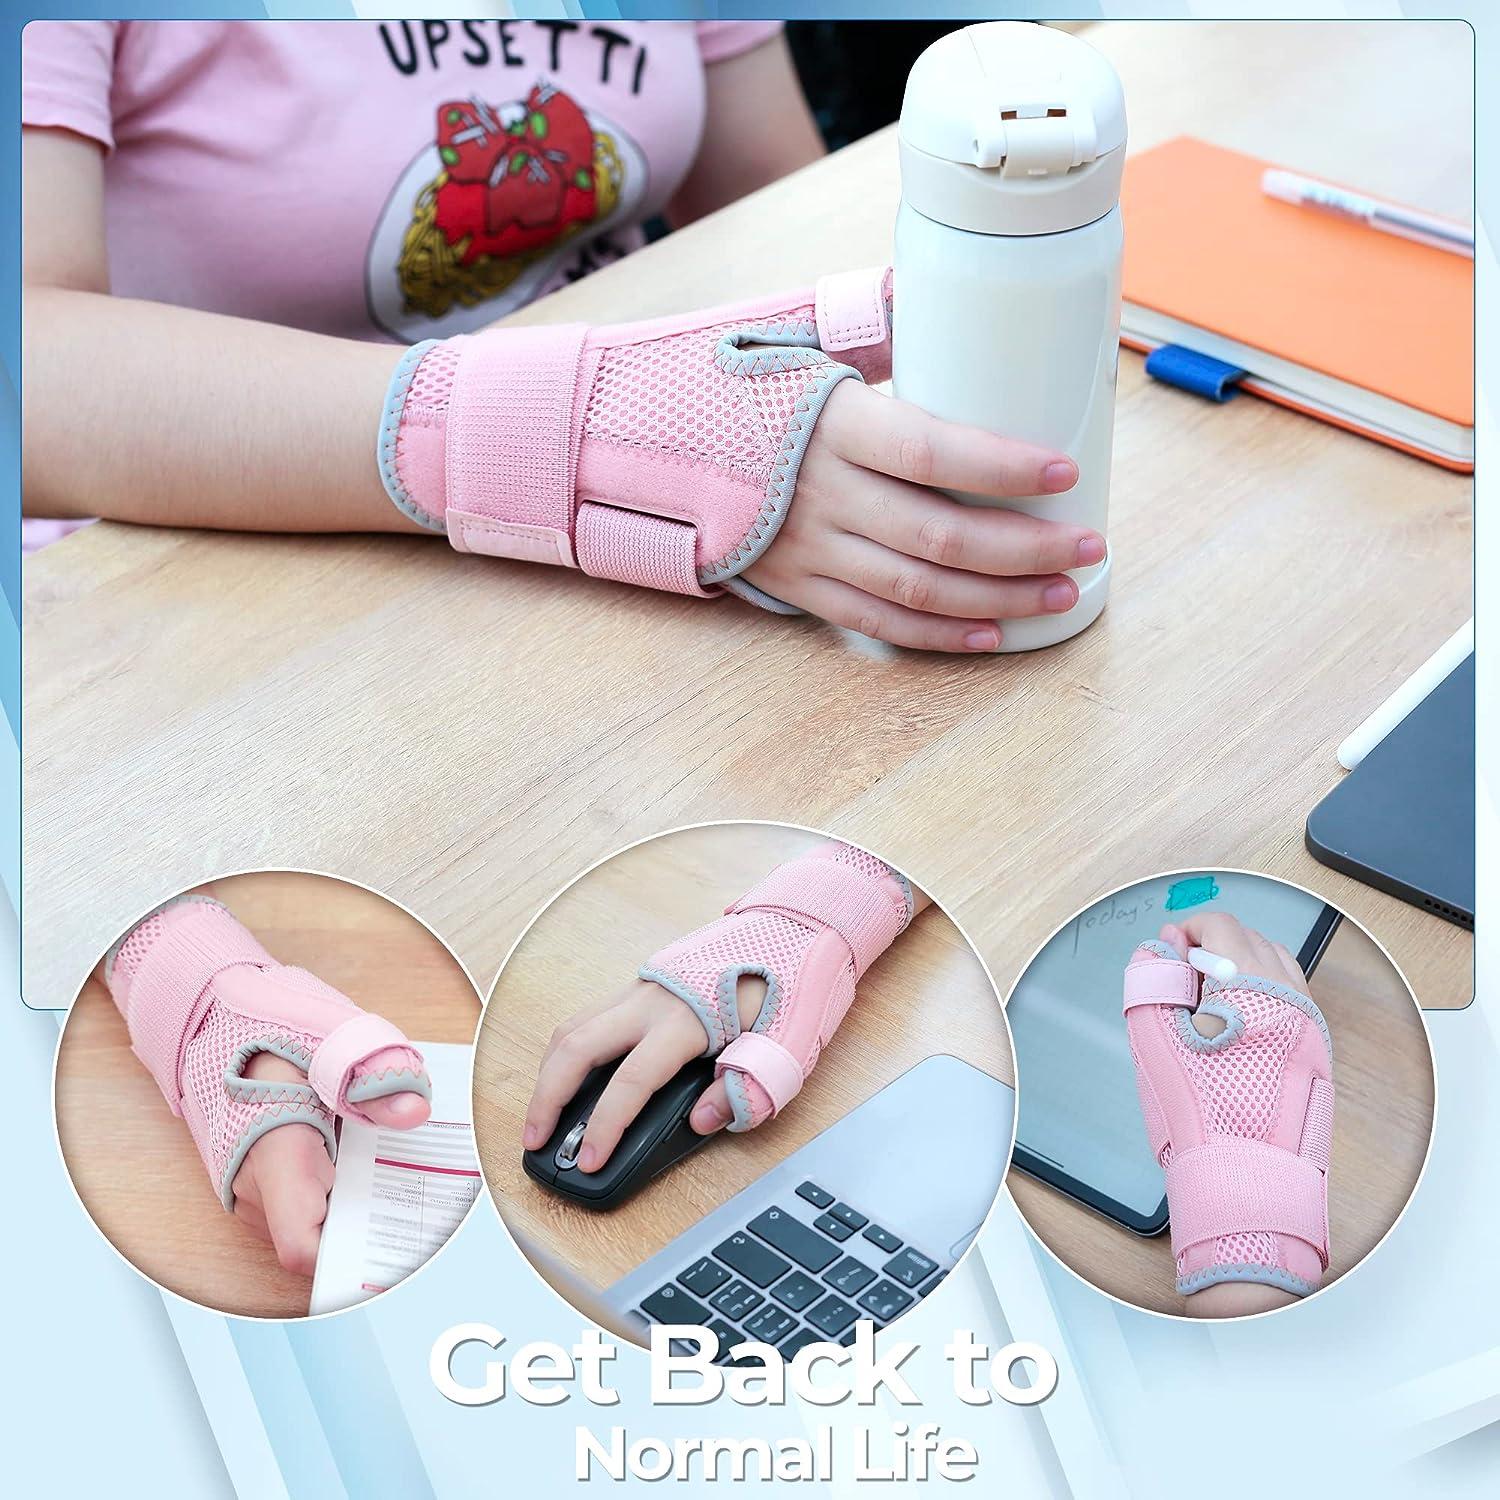 CURECARE New Upgraded Thumb Splint for Right & Left Hand, Reversible Thumb  Brace for Arthritis Pain And Support, Thumb Stabilizer for Sprains,  Tendonitis Relief, One Size Fits Any Hand (Pink)